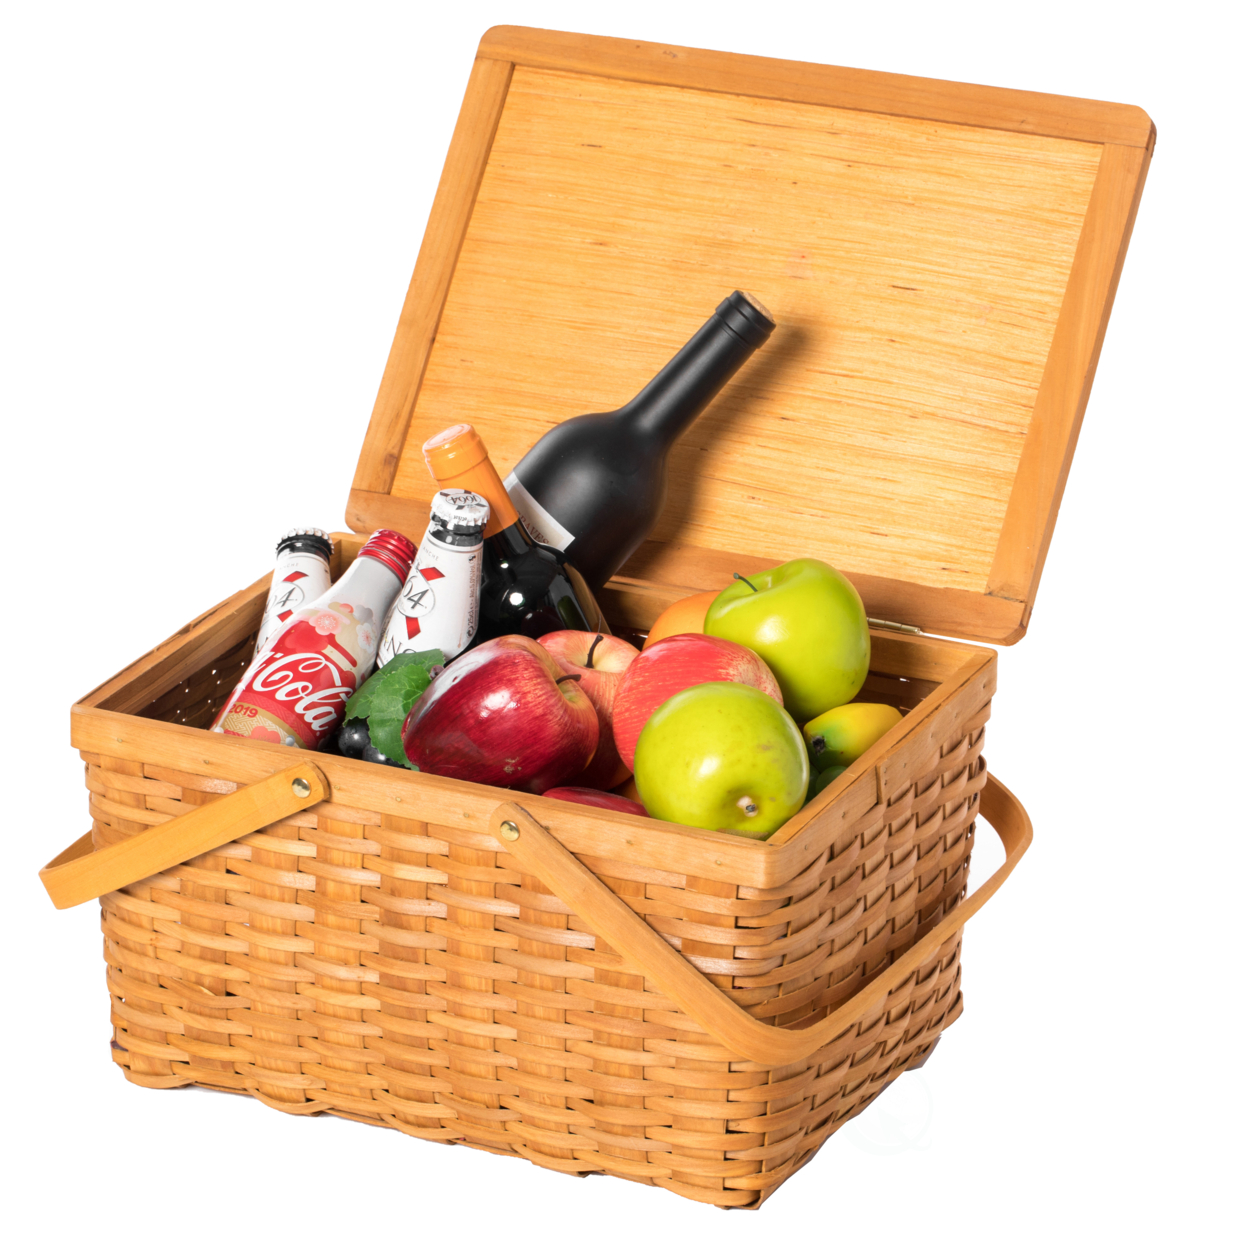 Woodchip Picnic Storage Basket With Cover And Movable Handles - Large